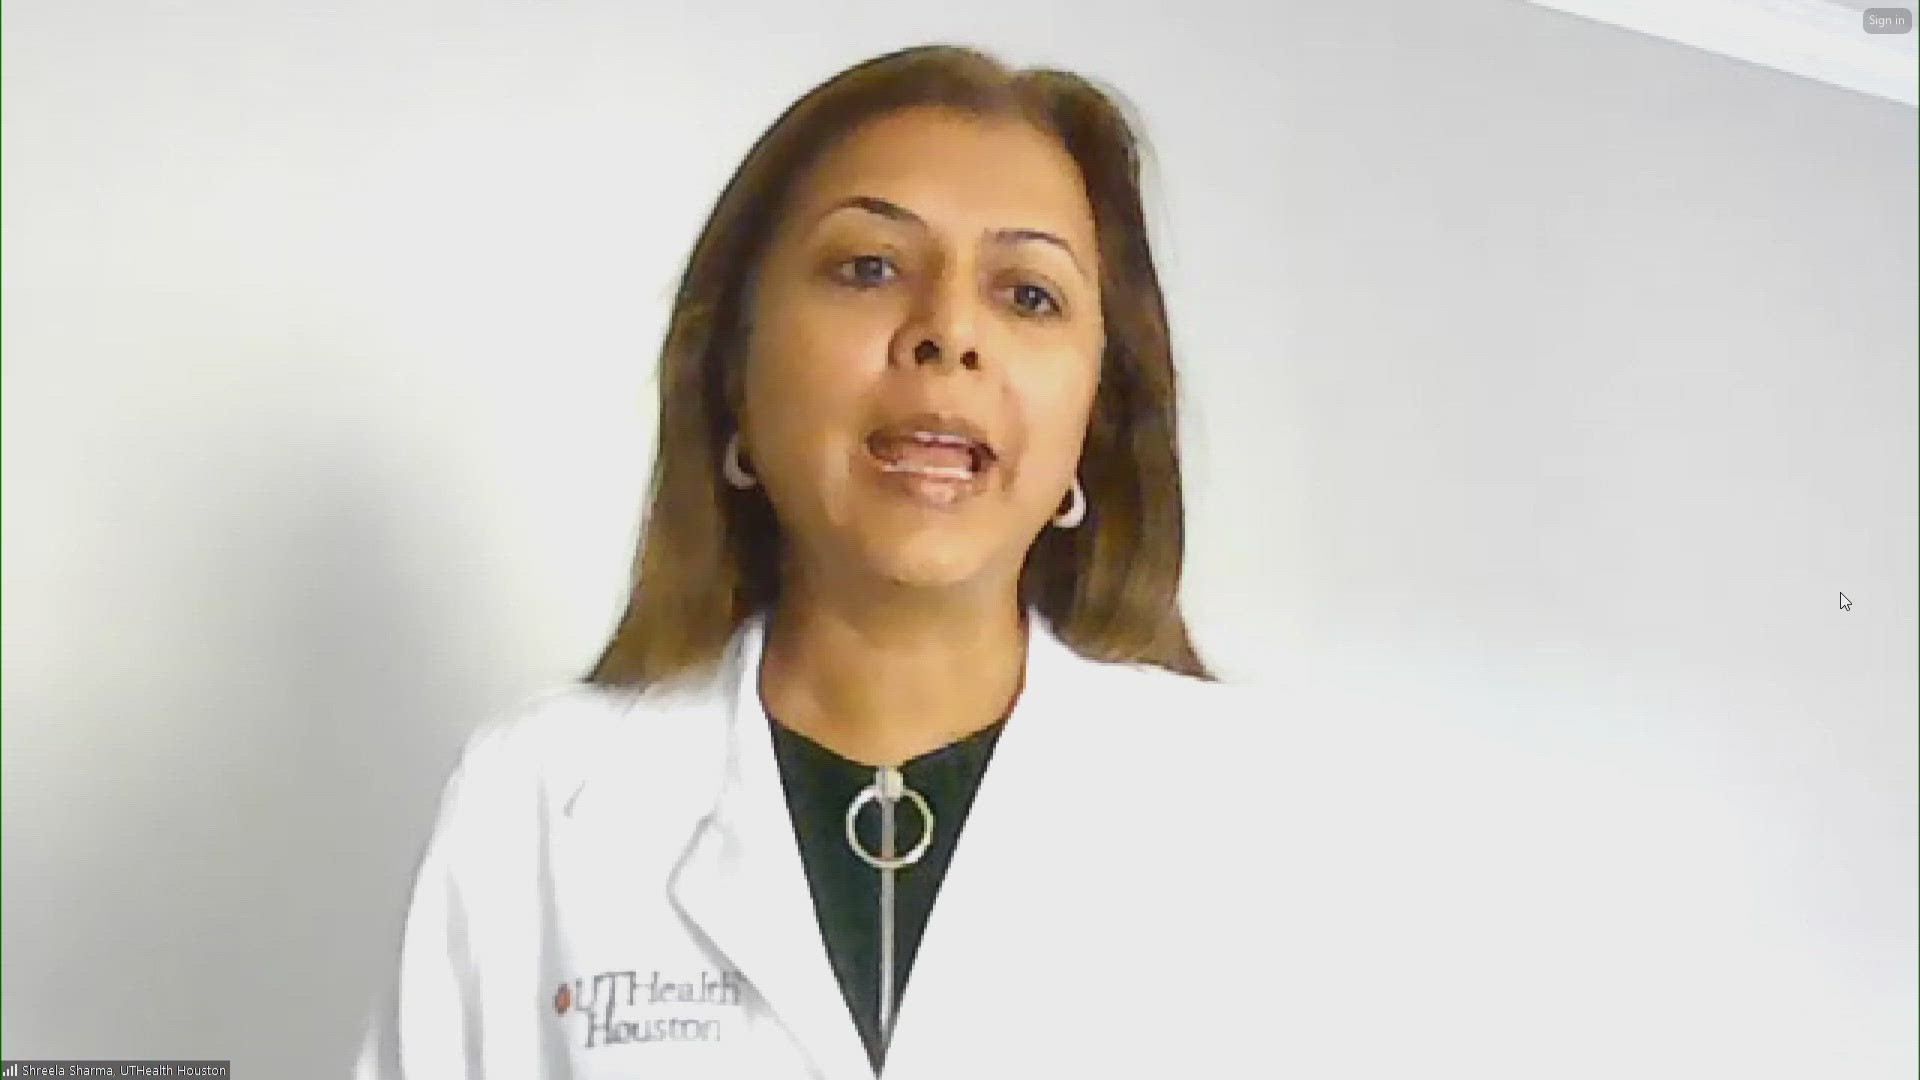 Dr. Shreela Sharma joins WFAA to discuss the "food is medicine" initiative.